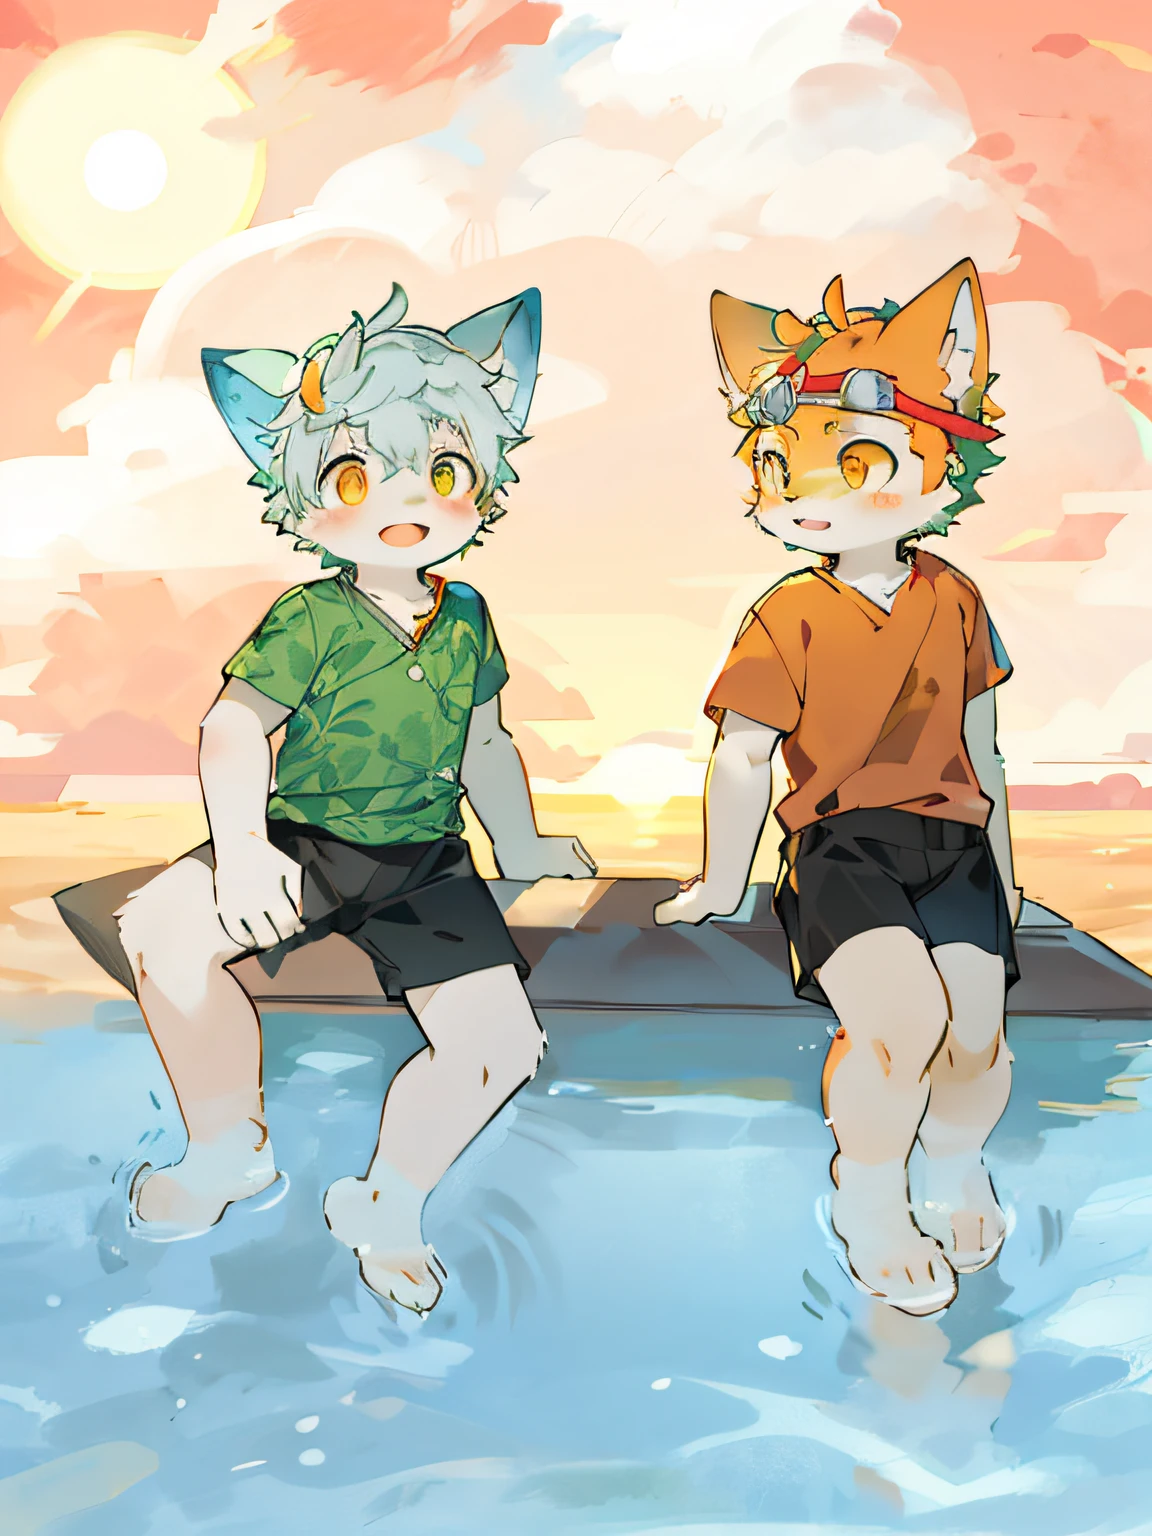 There are two cats sitting on the boat in the water, dusk, sun, sand, (the cat on the left has blue ears, green leaf clothes, black panties, yellow eyes, red eyebrows, bangs and hair), (the one on the right has only yellow ears, wearing orange clothes, blue eyes, and an adventure mirror on his head), water's edge, two beast boys, clear eyes, masterpiece, masterpiece